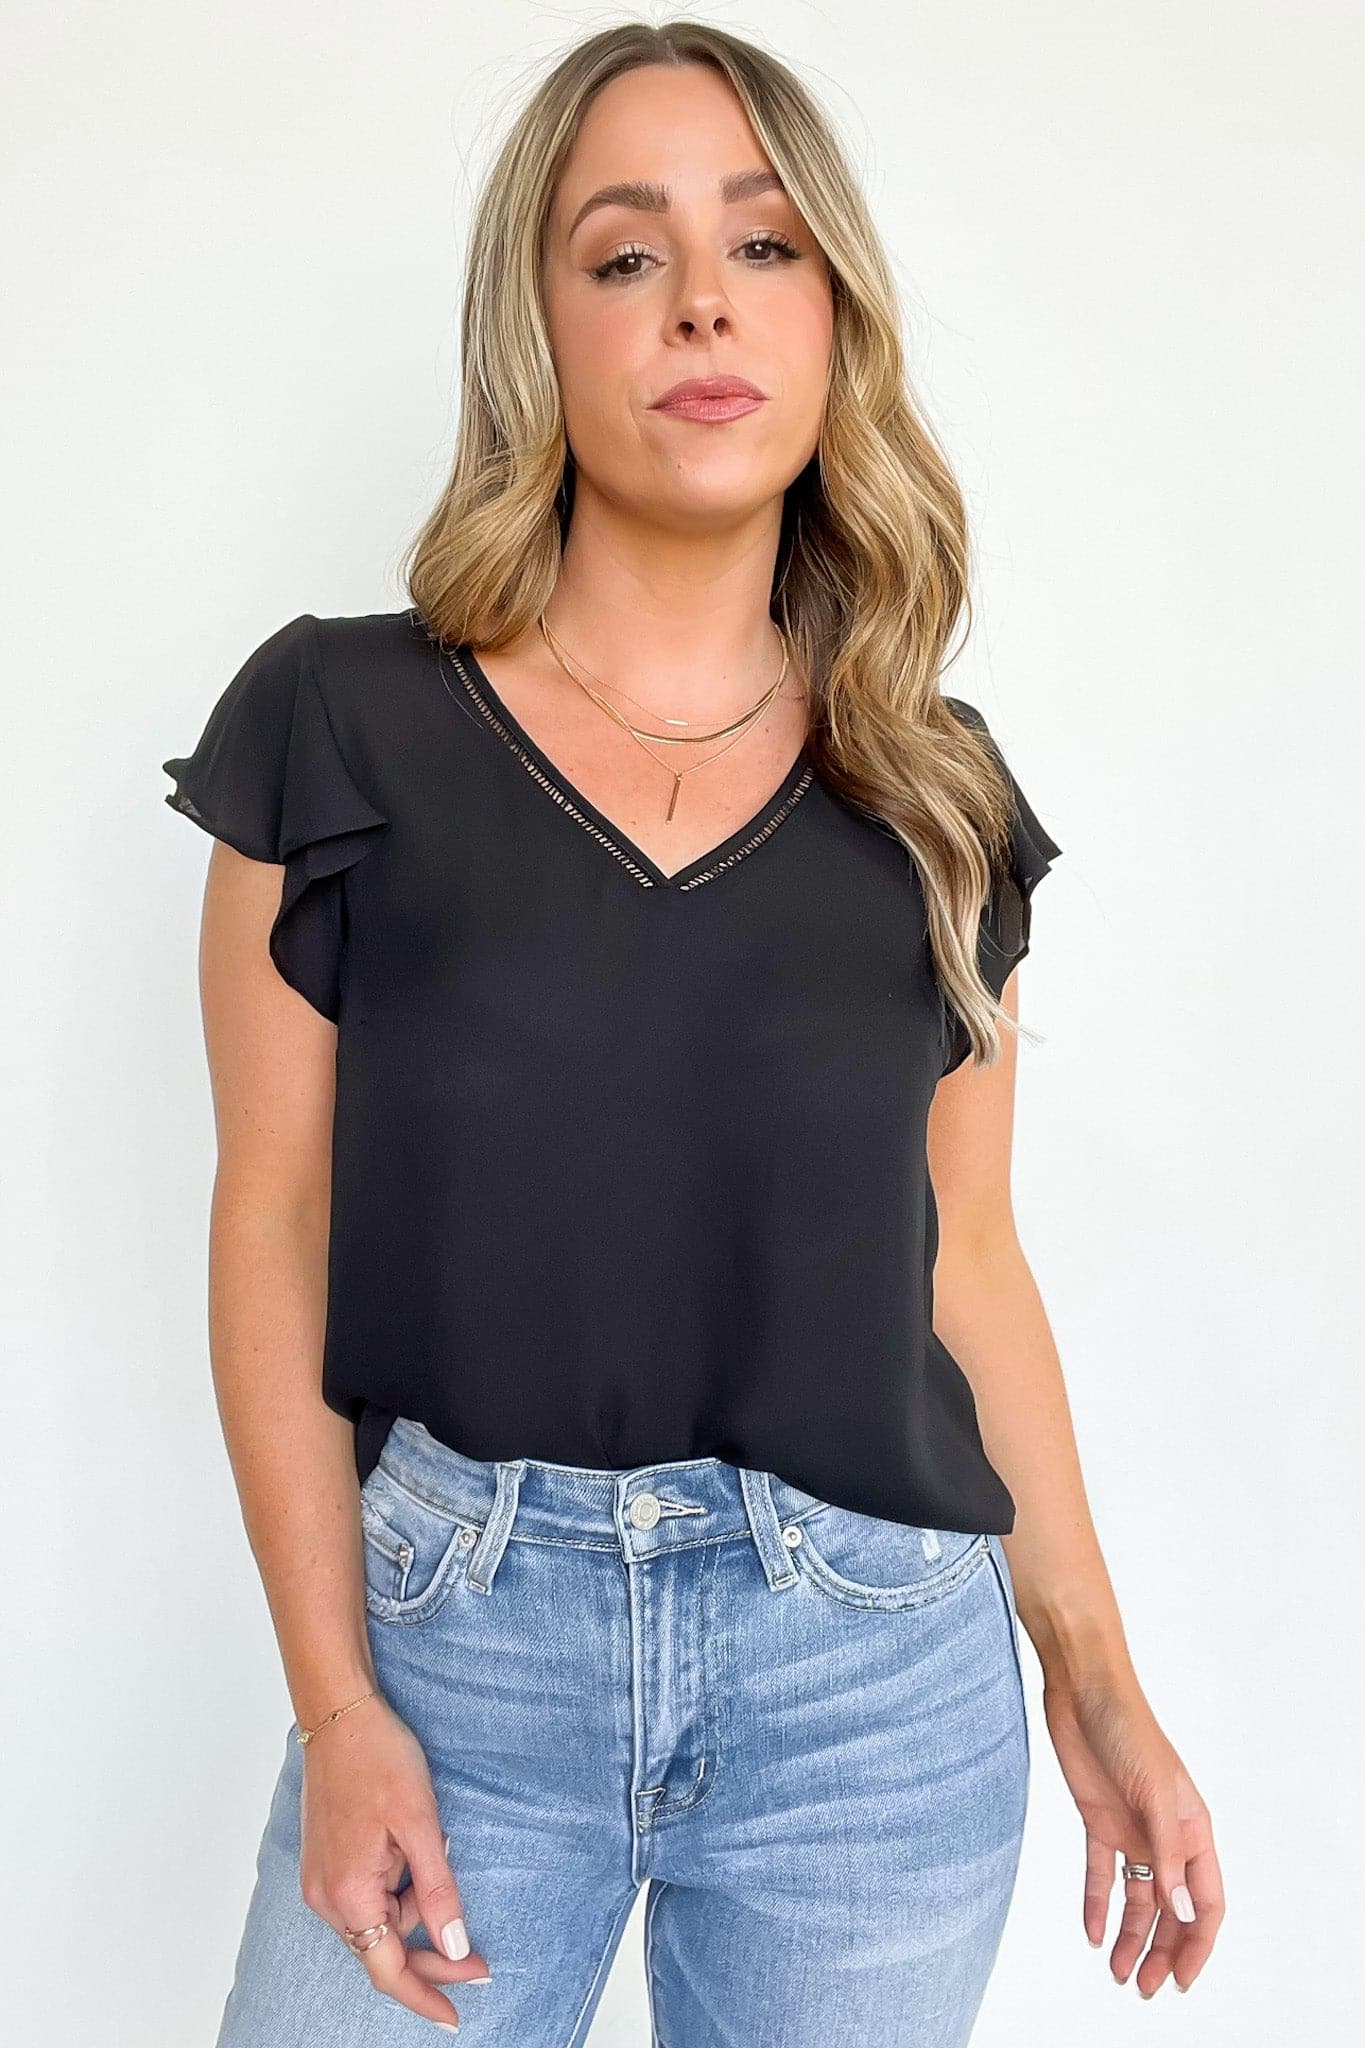  Mckynley V-Neck Ruffle Sleeve Top - FINAL SALE - Madison and Mallory